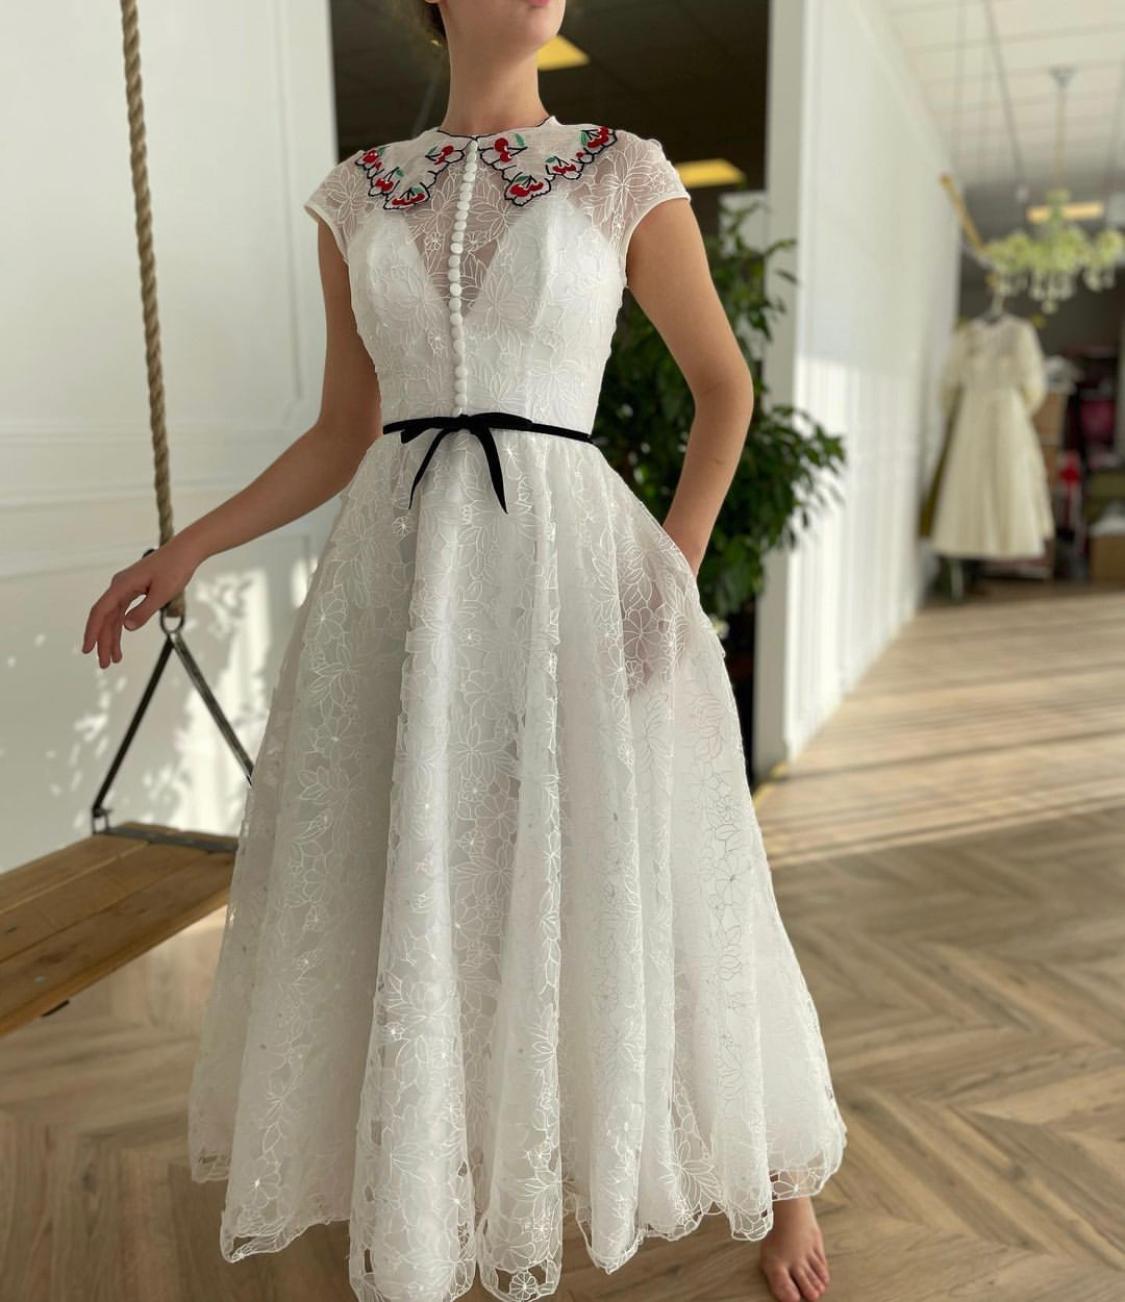 Midi white bridal dress with buttons, embroidered flowers and short sleeves